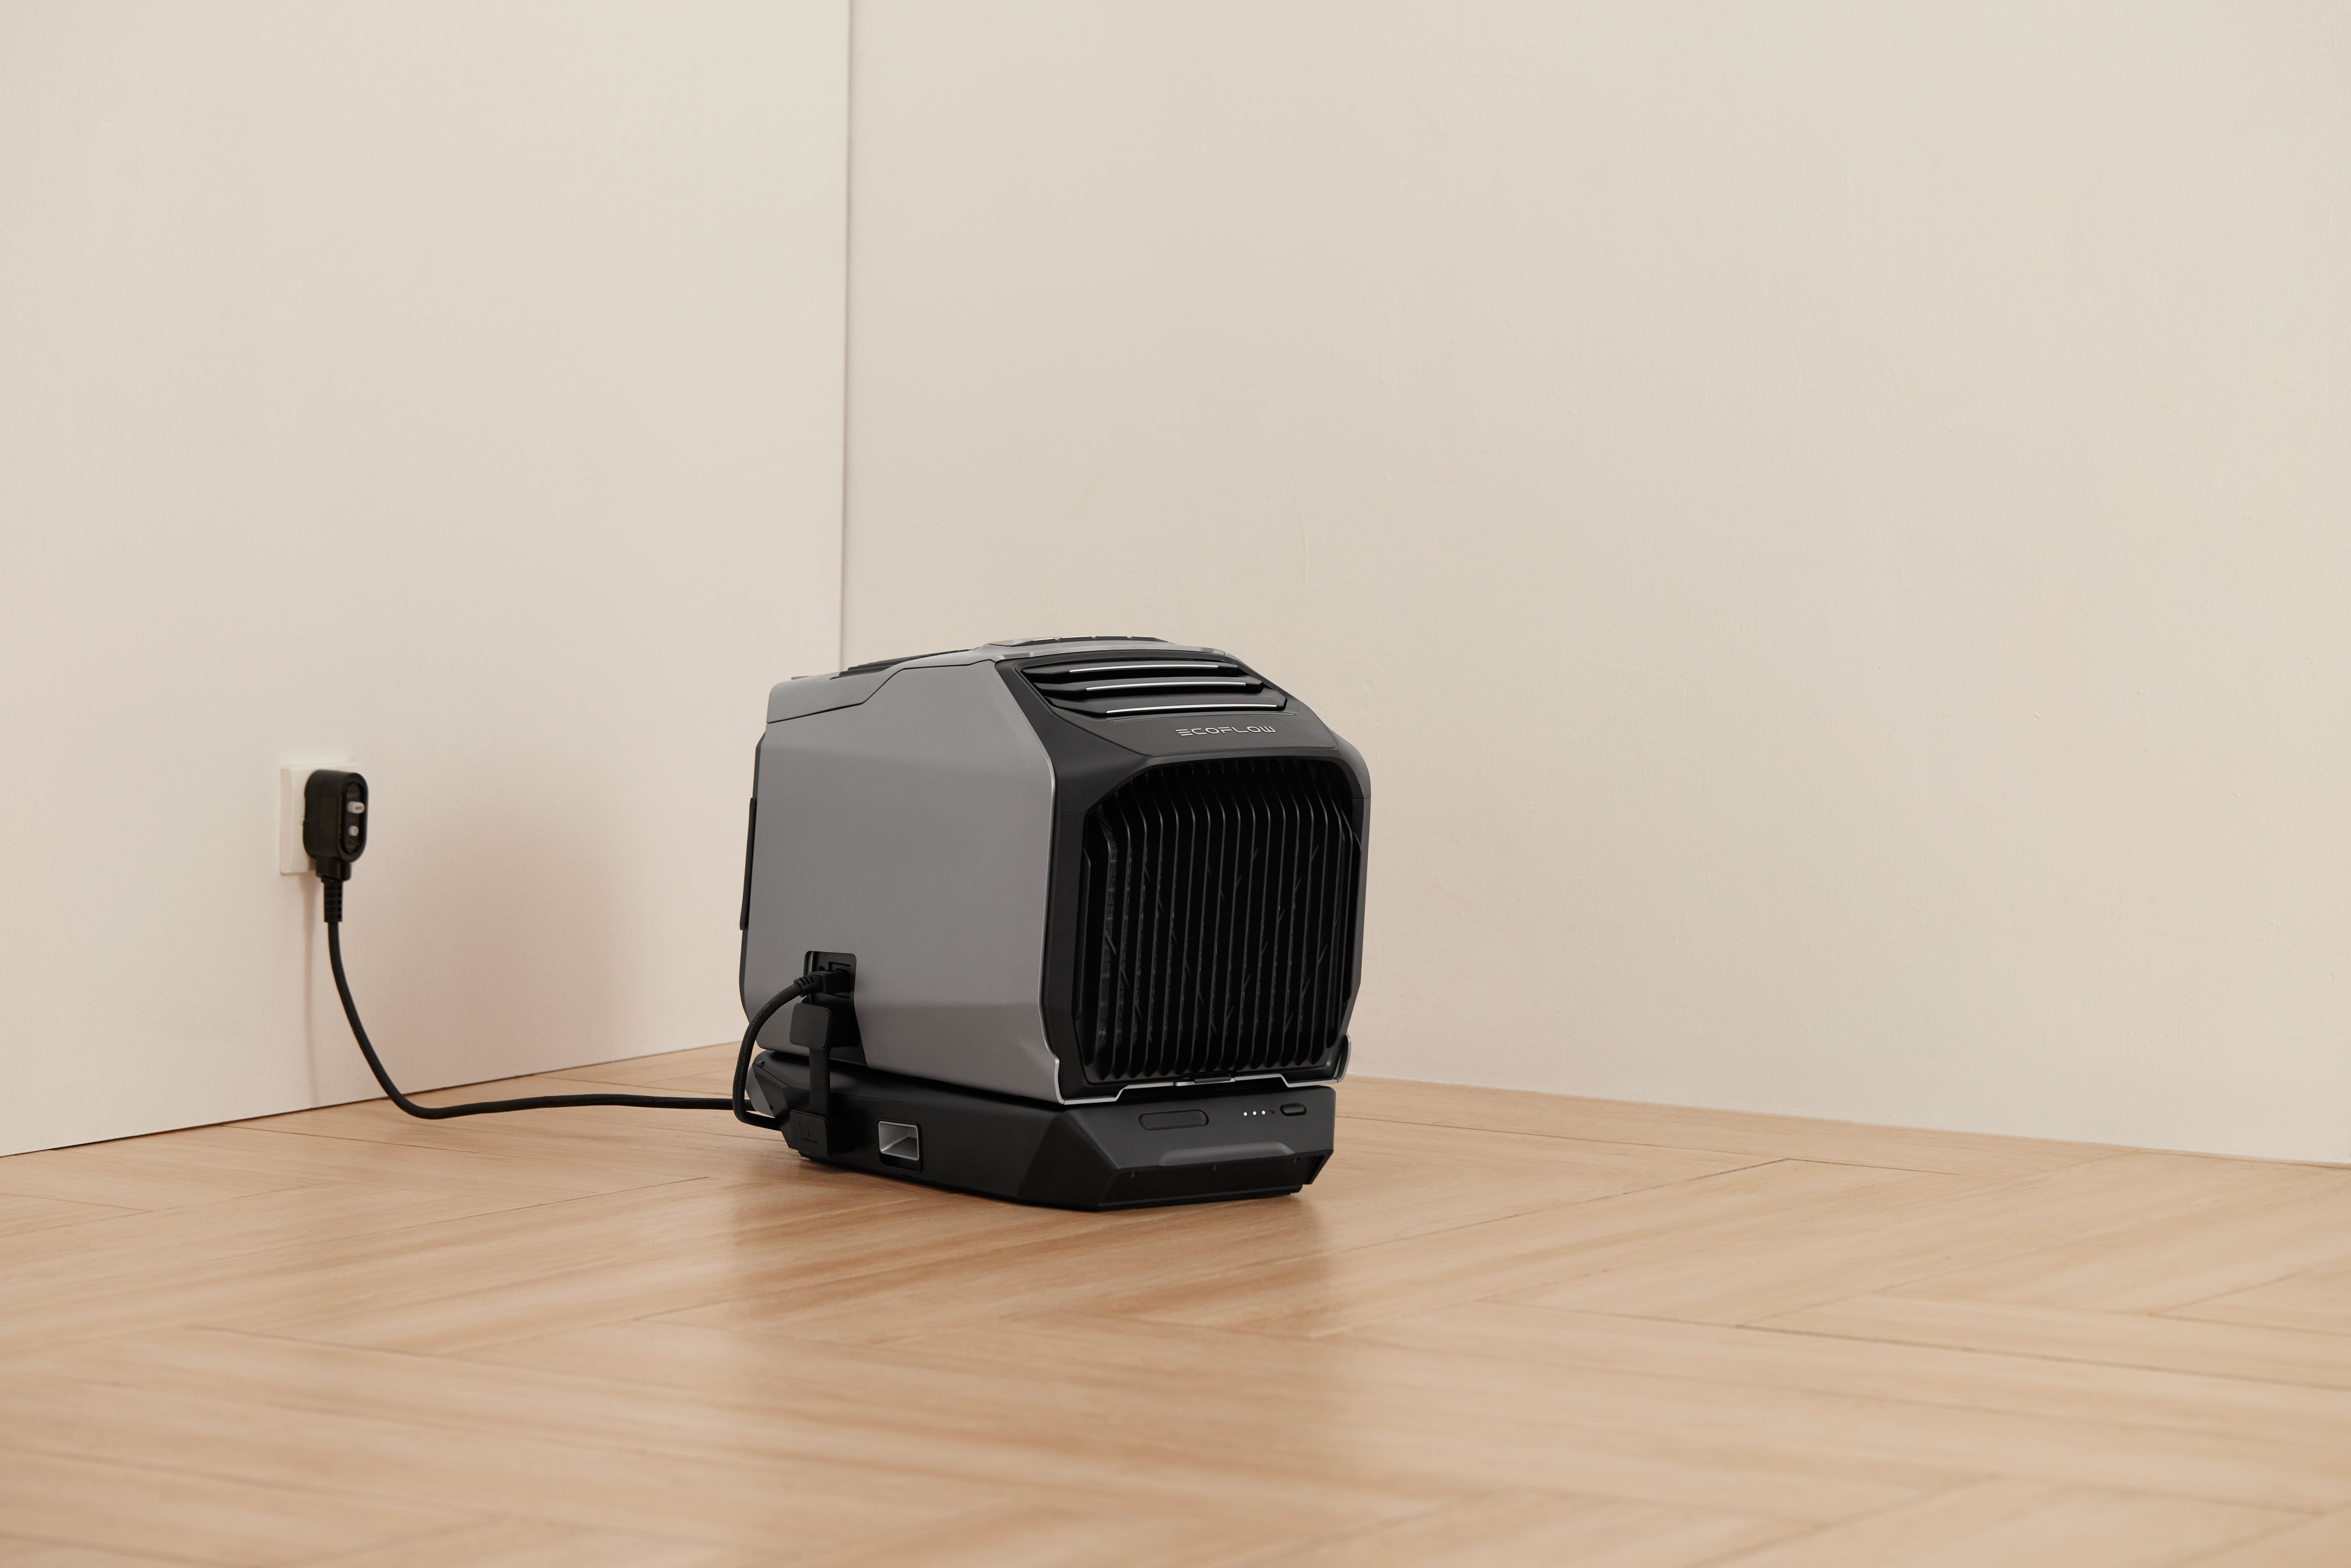 EcoFlow Wave 2 Portable Air Conditioner Plugged Into Wall